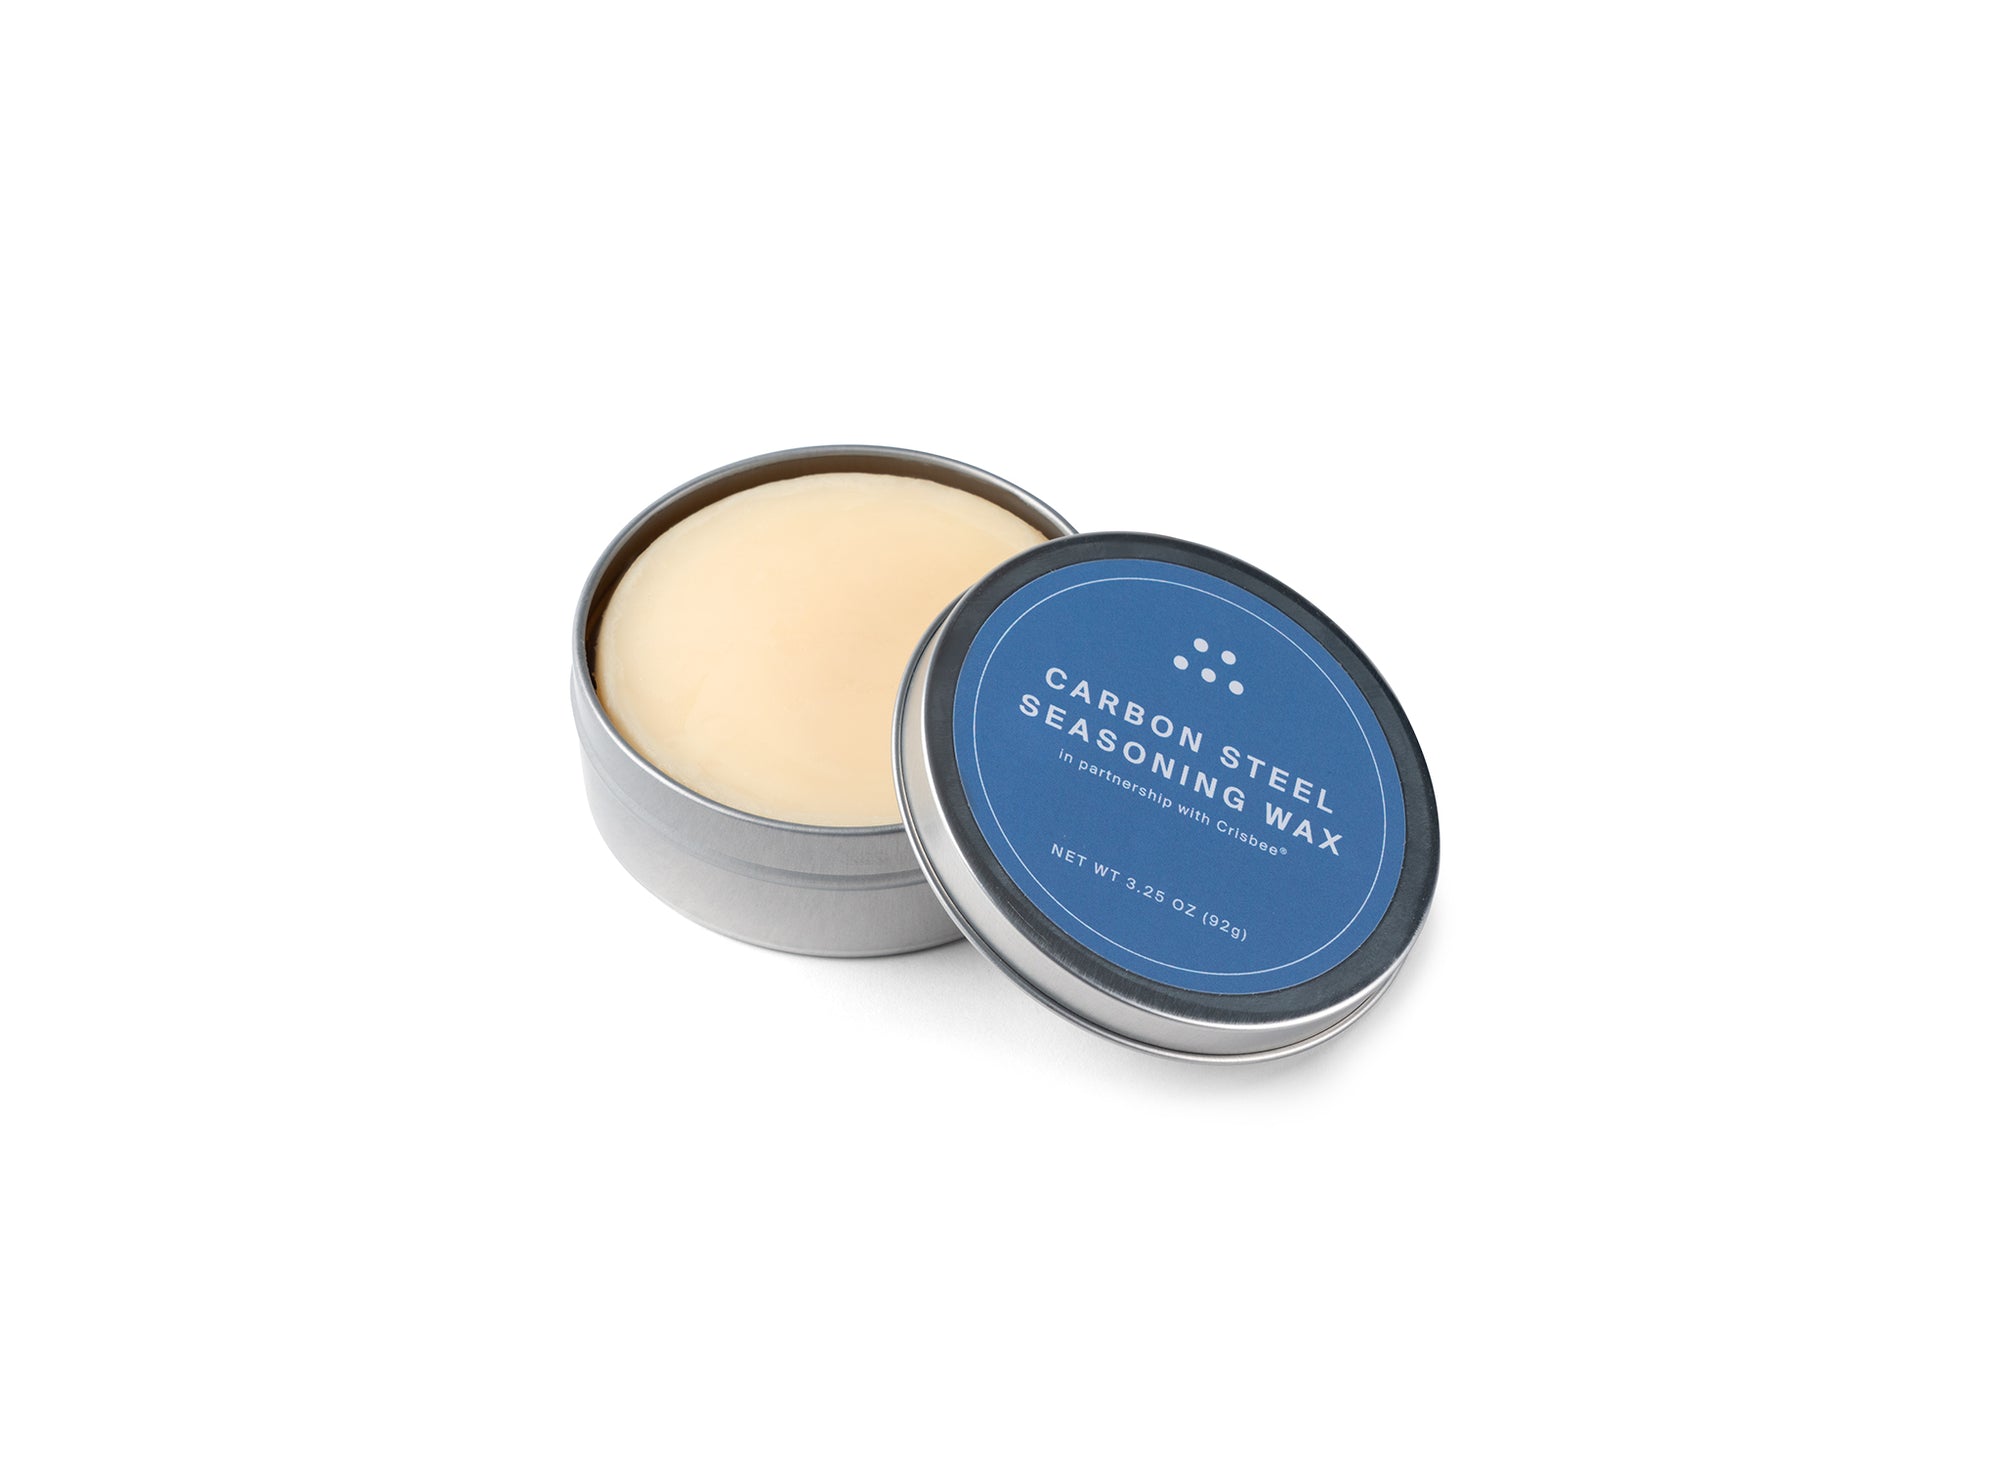 {{3-25-oz}} MIsen Carbon Steel Seasoning Wax tin with lid partially removed on a white background, showing a pale yellow wax puck.